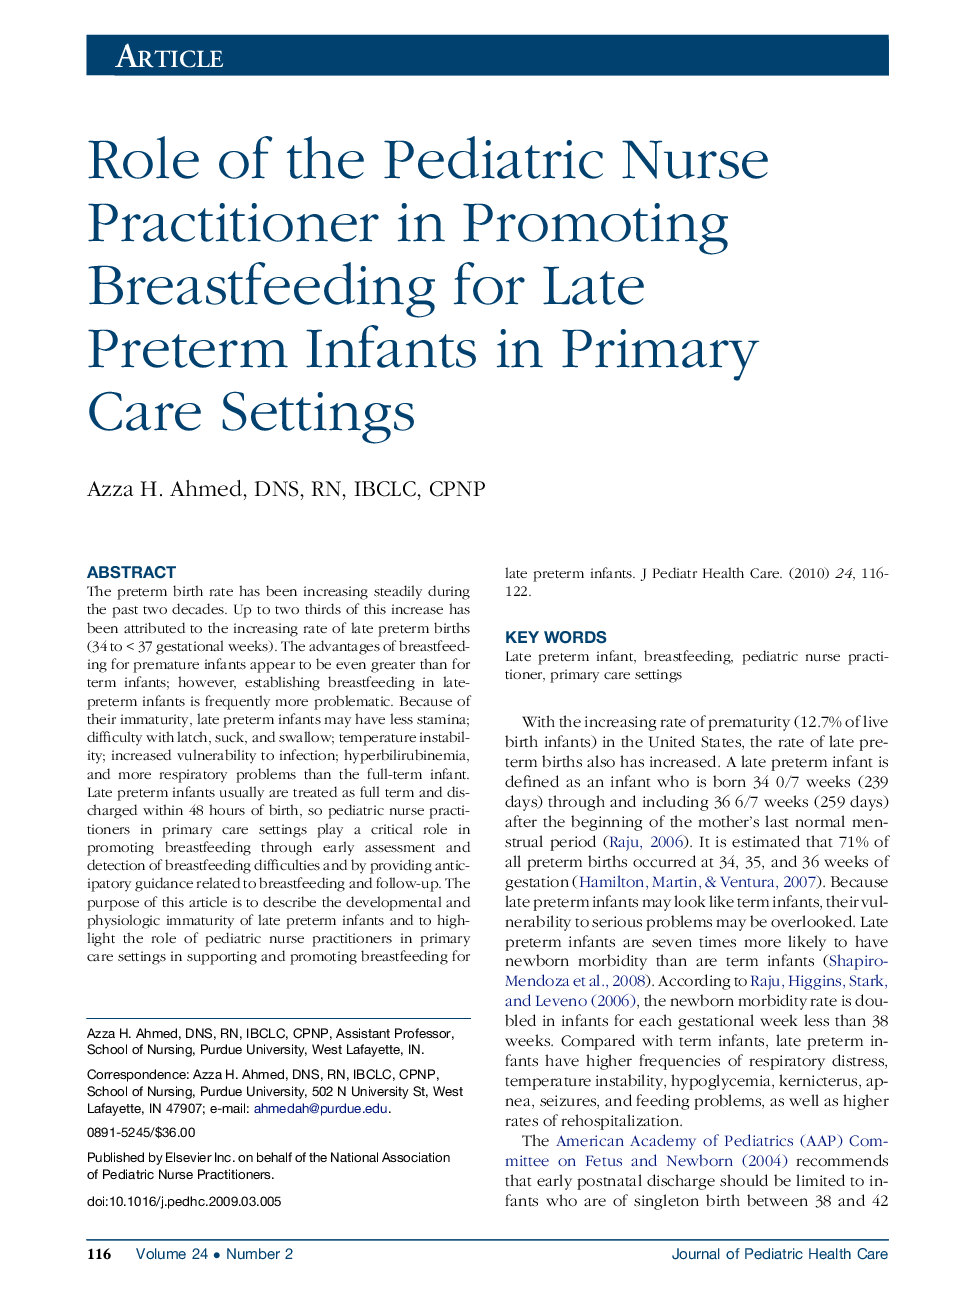 Role of the Pediatric Nurse Practitioner in Promoting Breastfeeding for Late Preterm Infants in Primary Care Settings